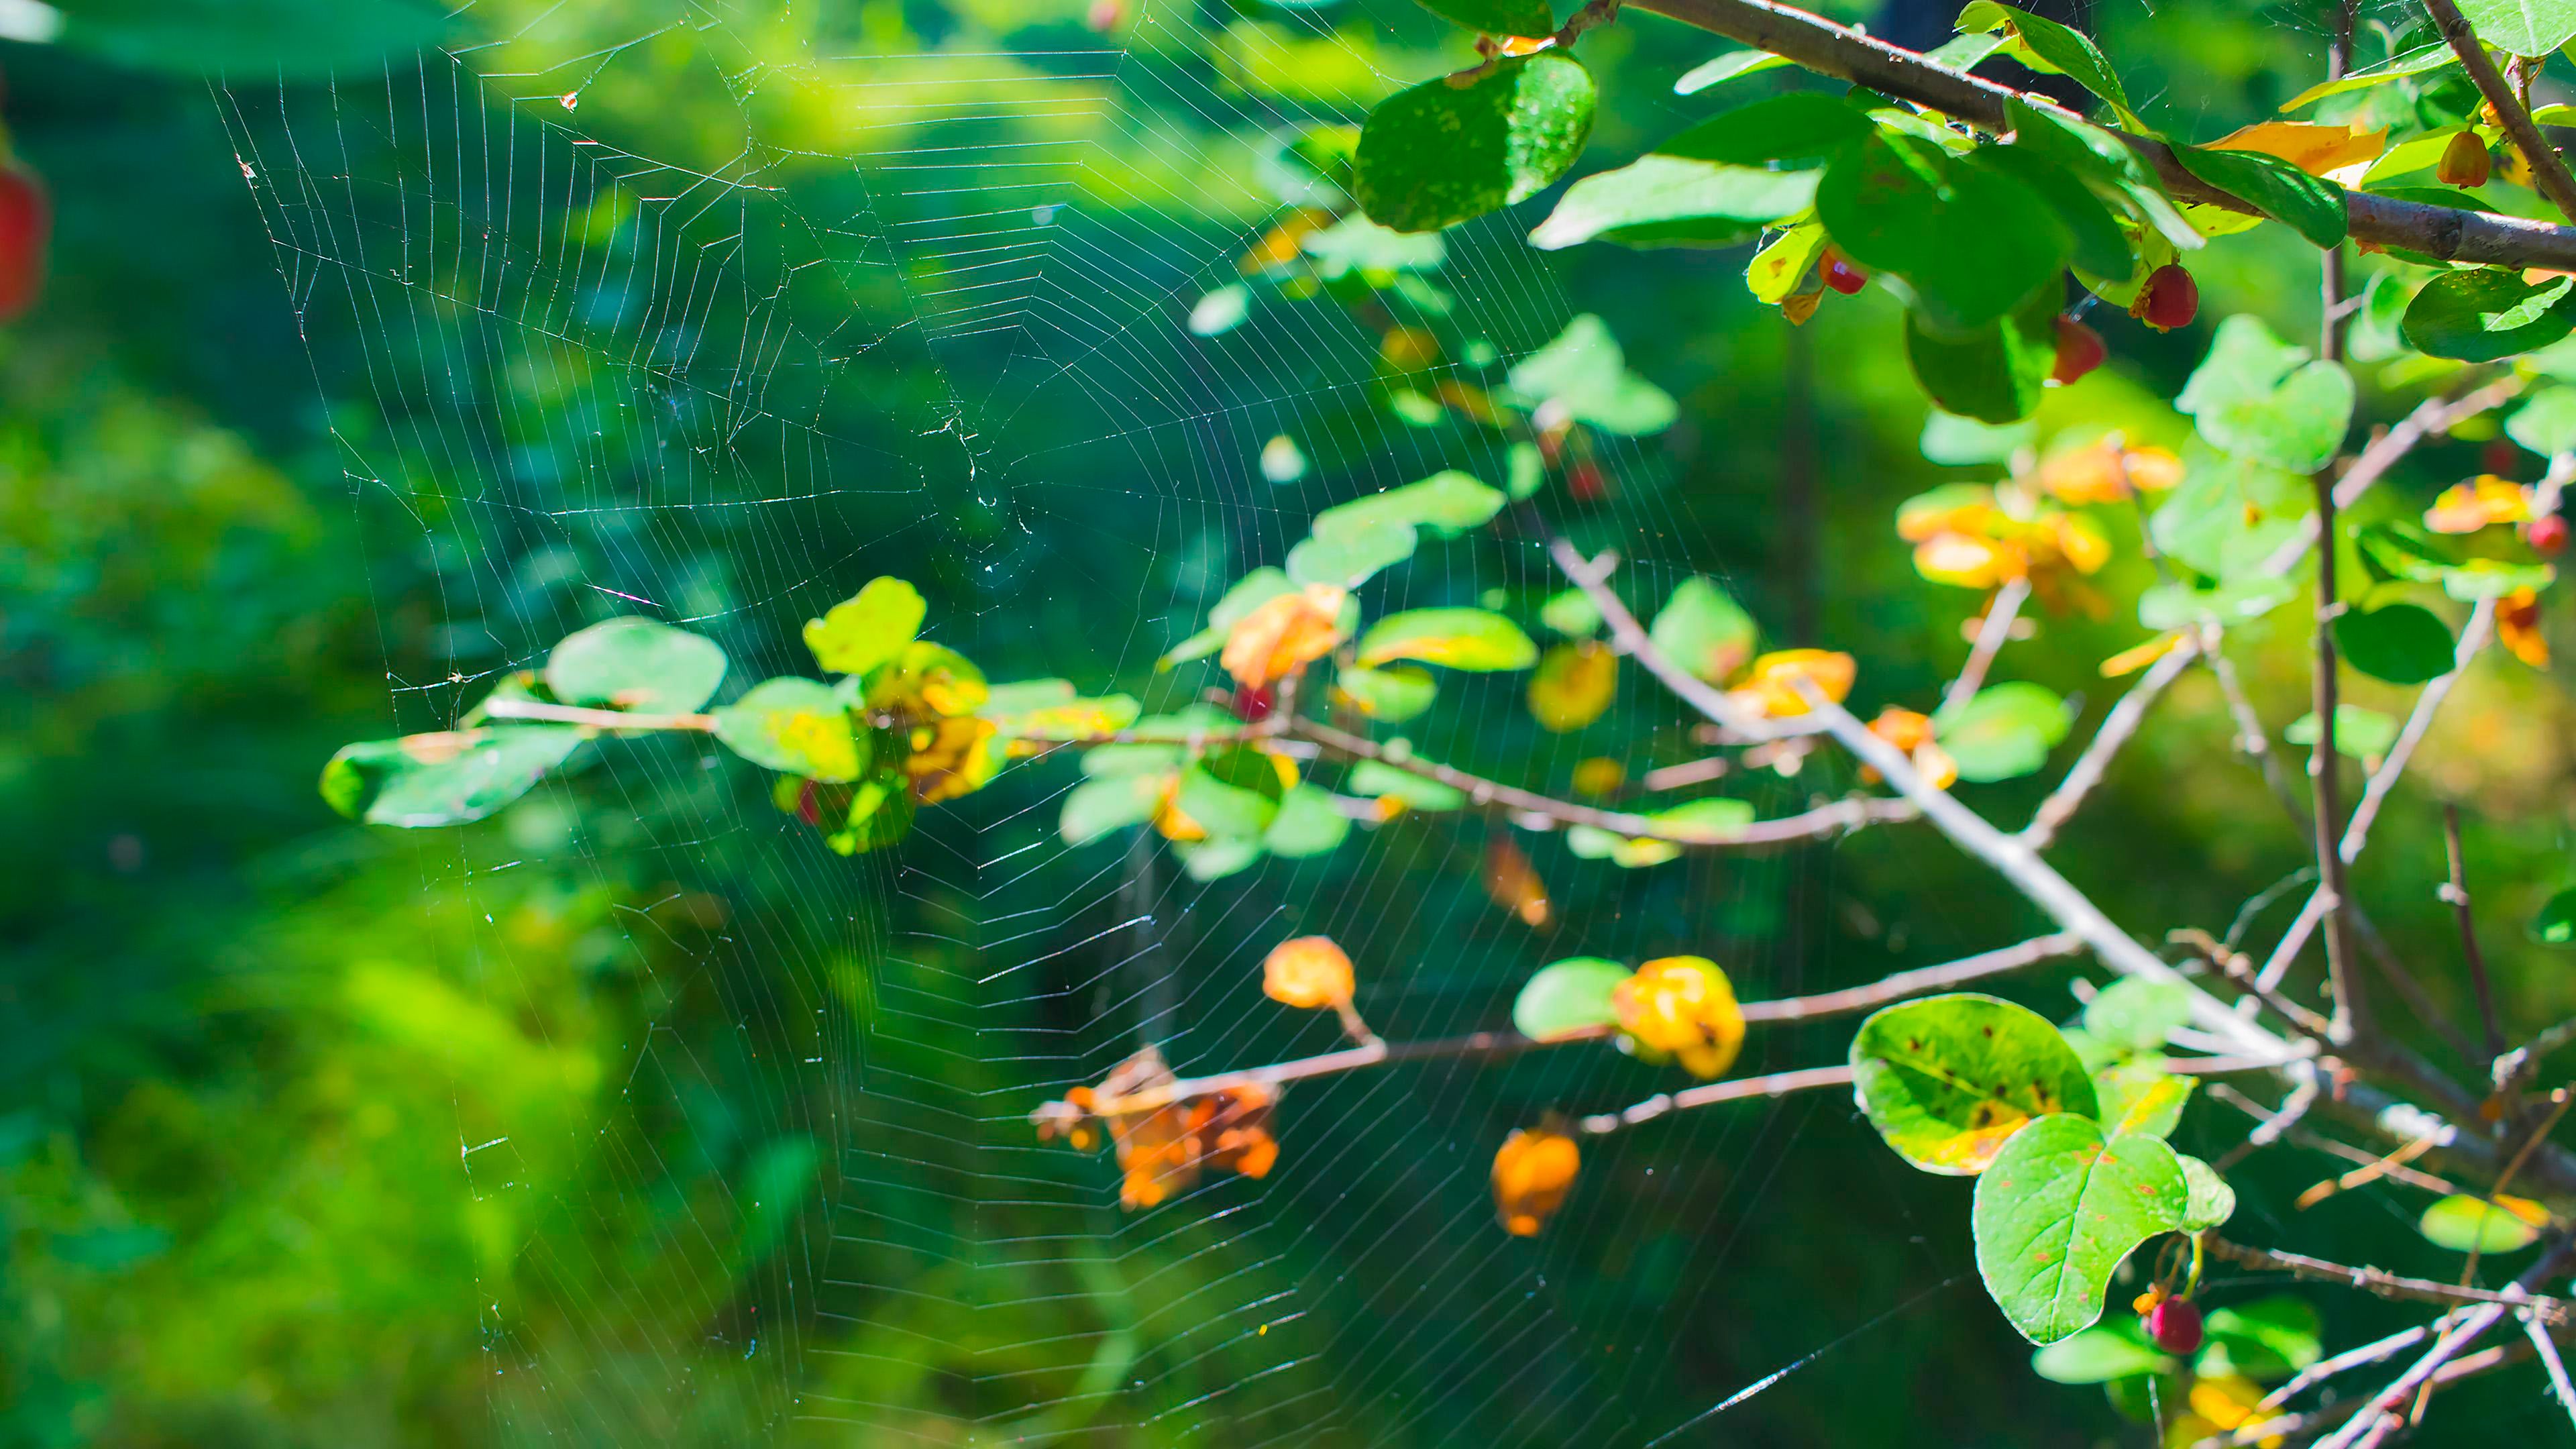 A Spiderweb in a Morning Forest 4K wallpaper